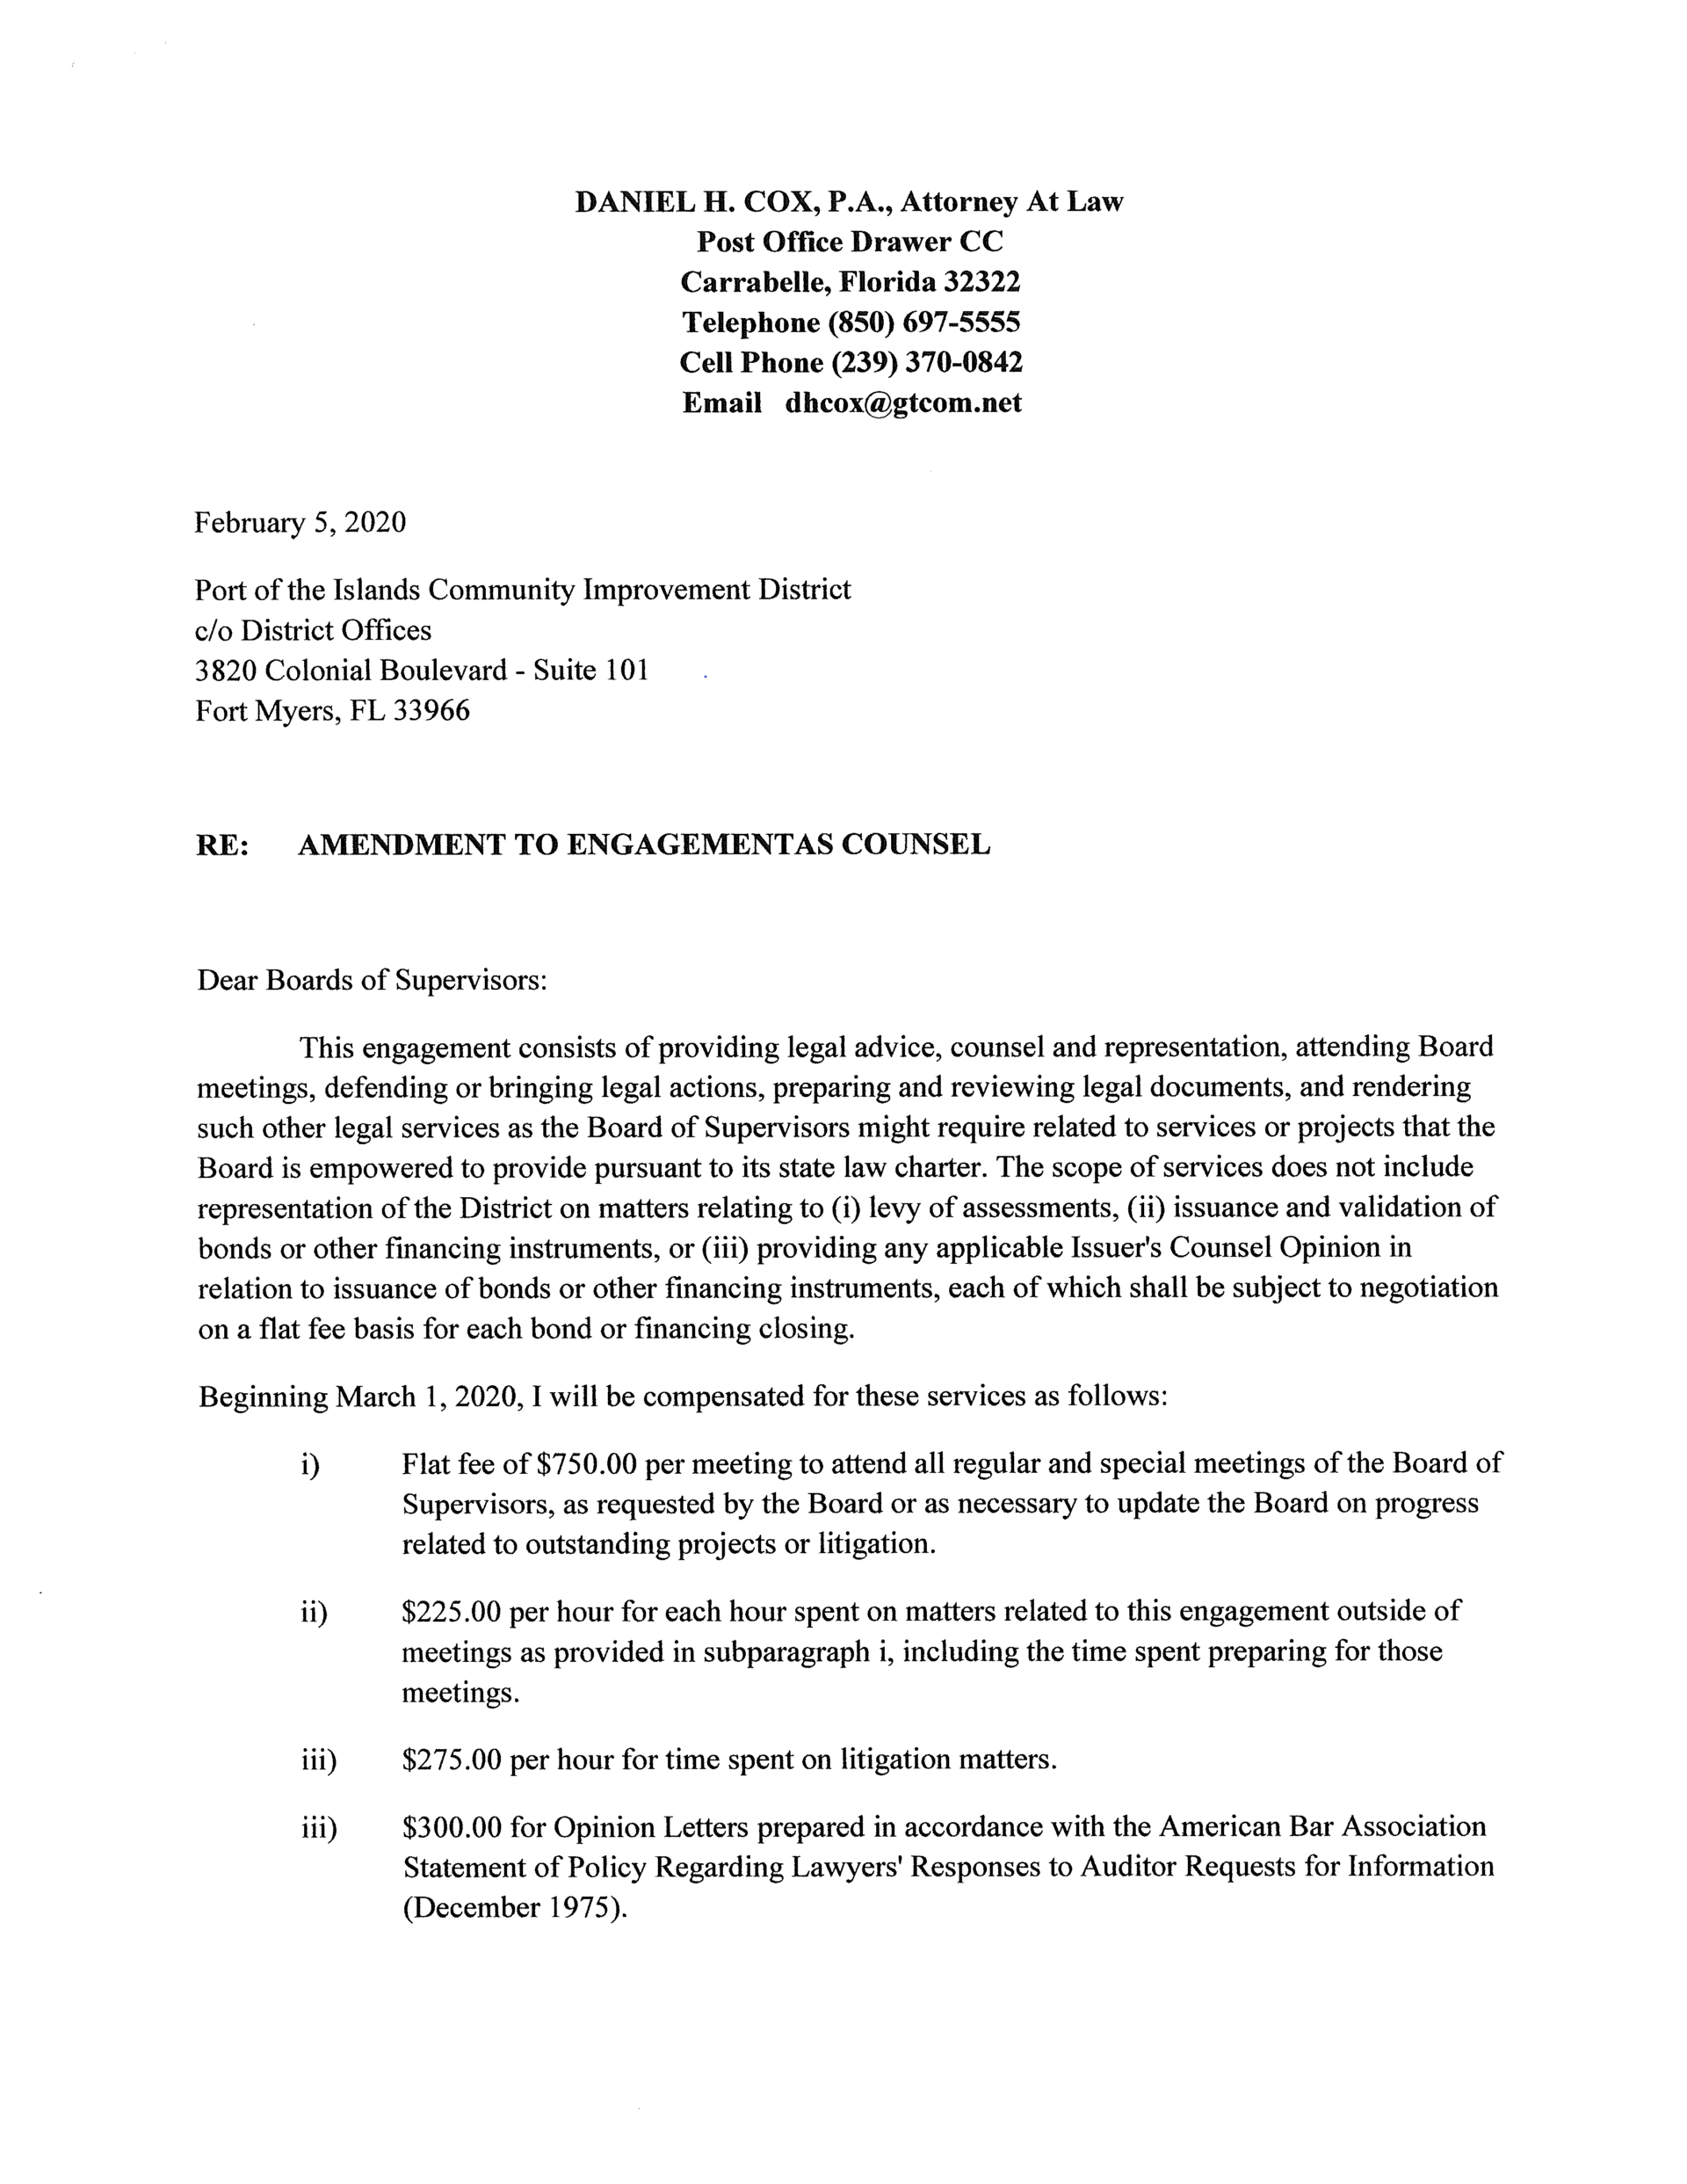 Attorney Letter requesting fee increase